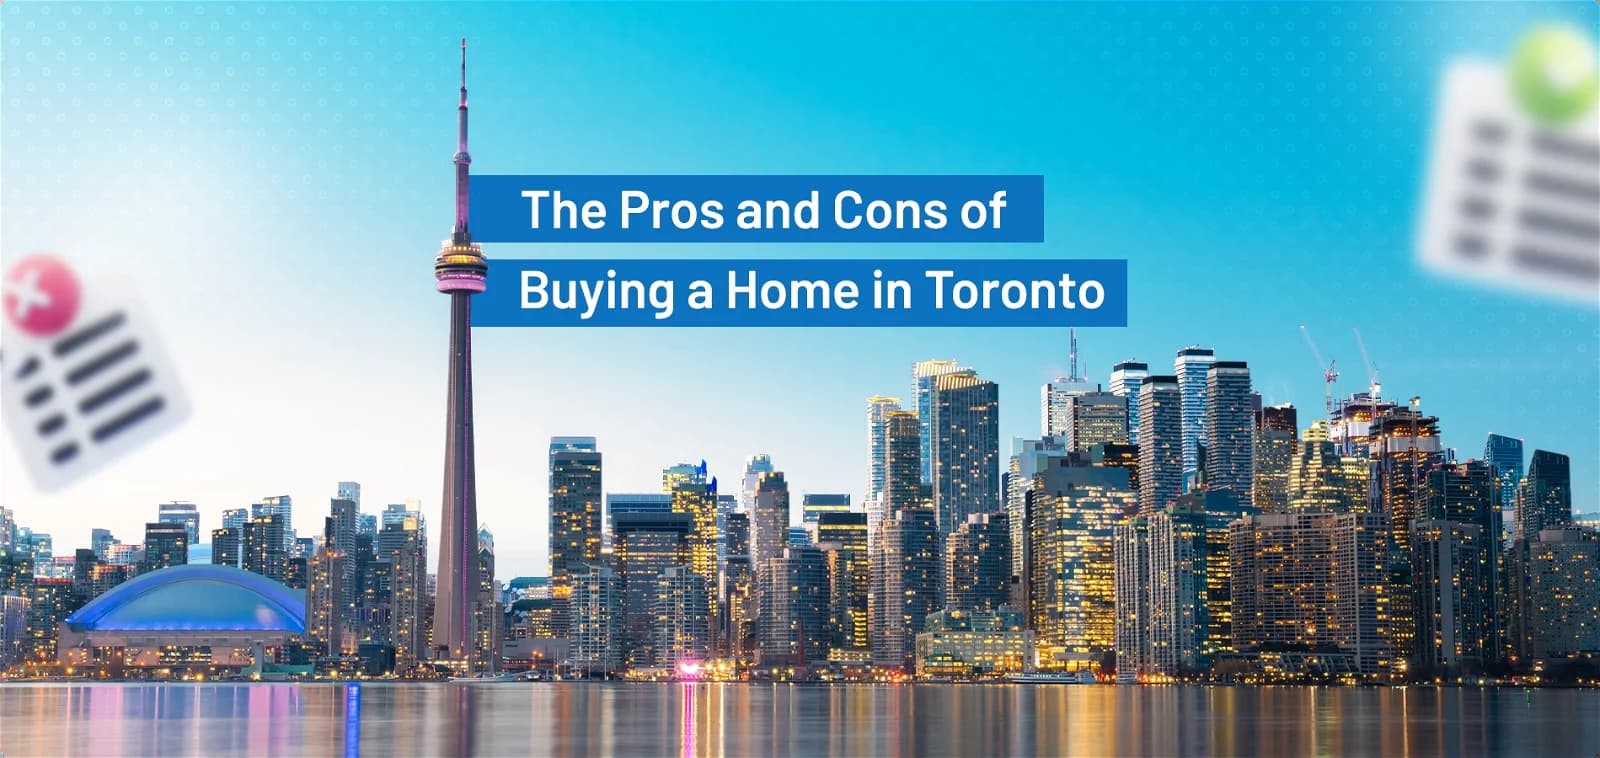 The Pros and Cons of Buying a Home in Toronto